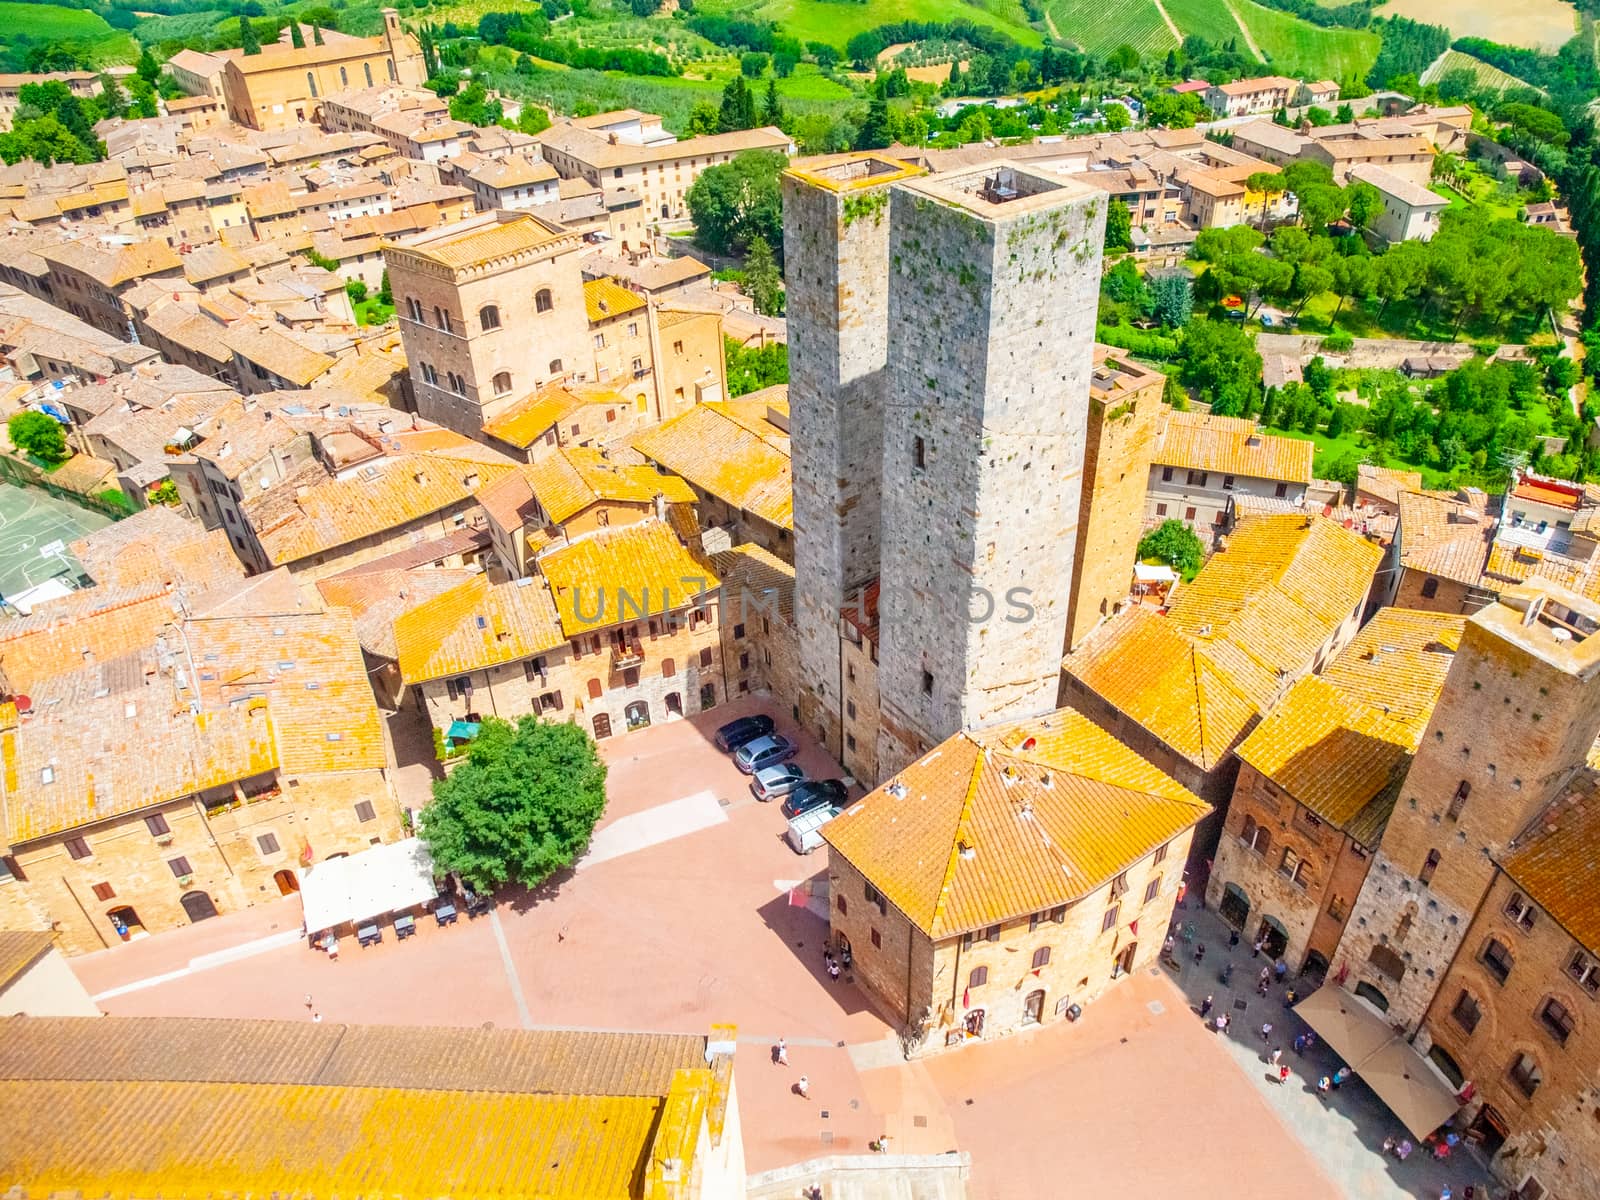 Aerial view of San Gimignano historical city centre with twin towers - Torri dei Salvucci, Tuscany, Italy.